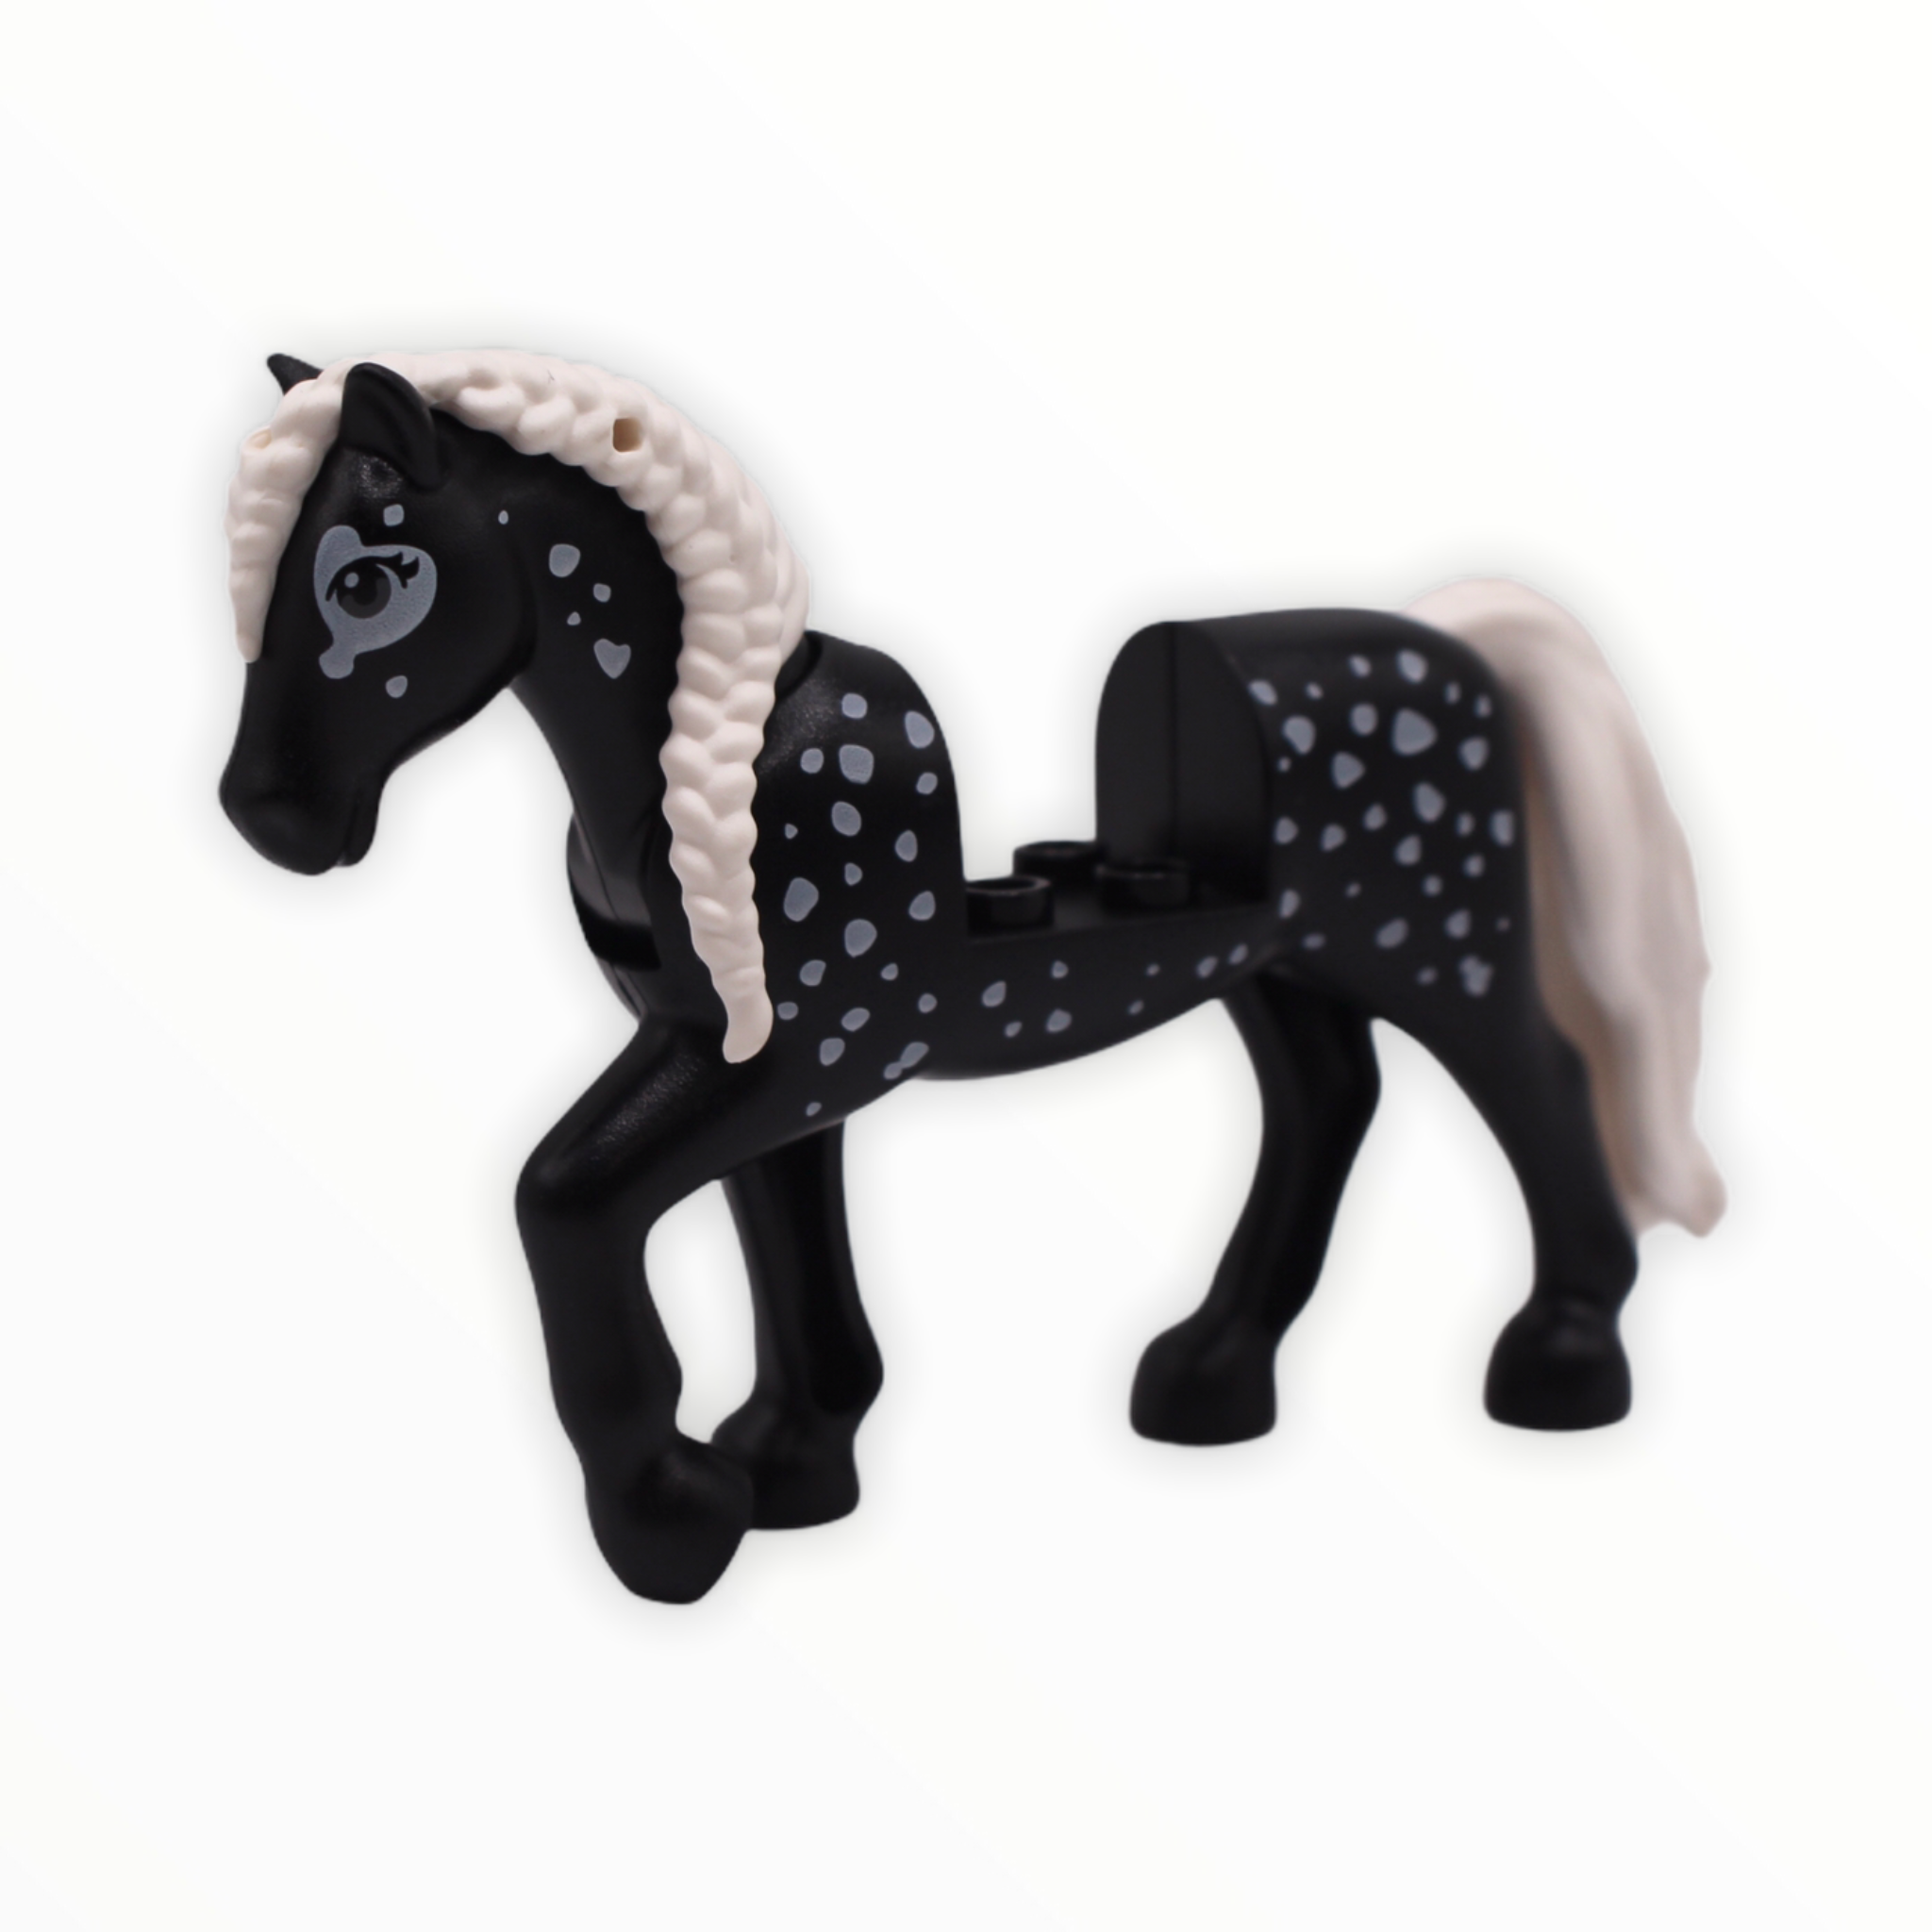 Black Horse with White Spots and White Braided Mane (Friends, 2021)